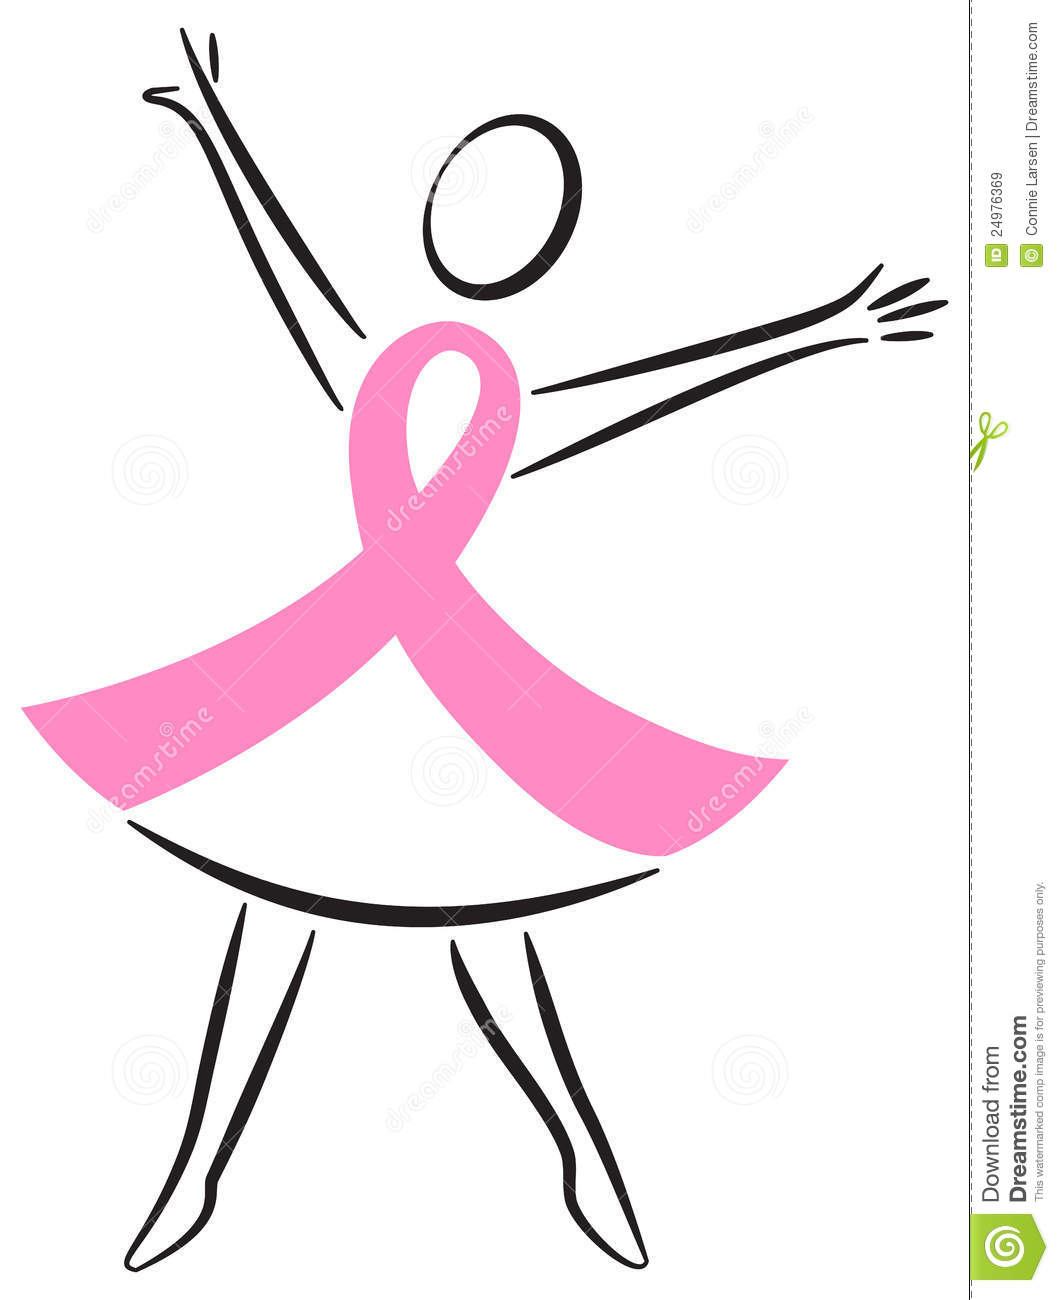 Cancer clipart #2, Download drawings